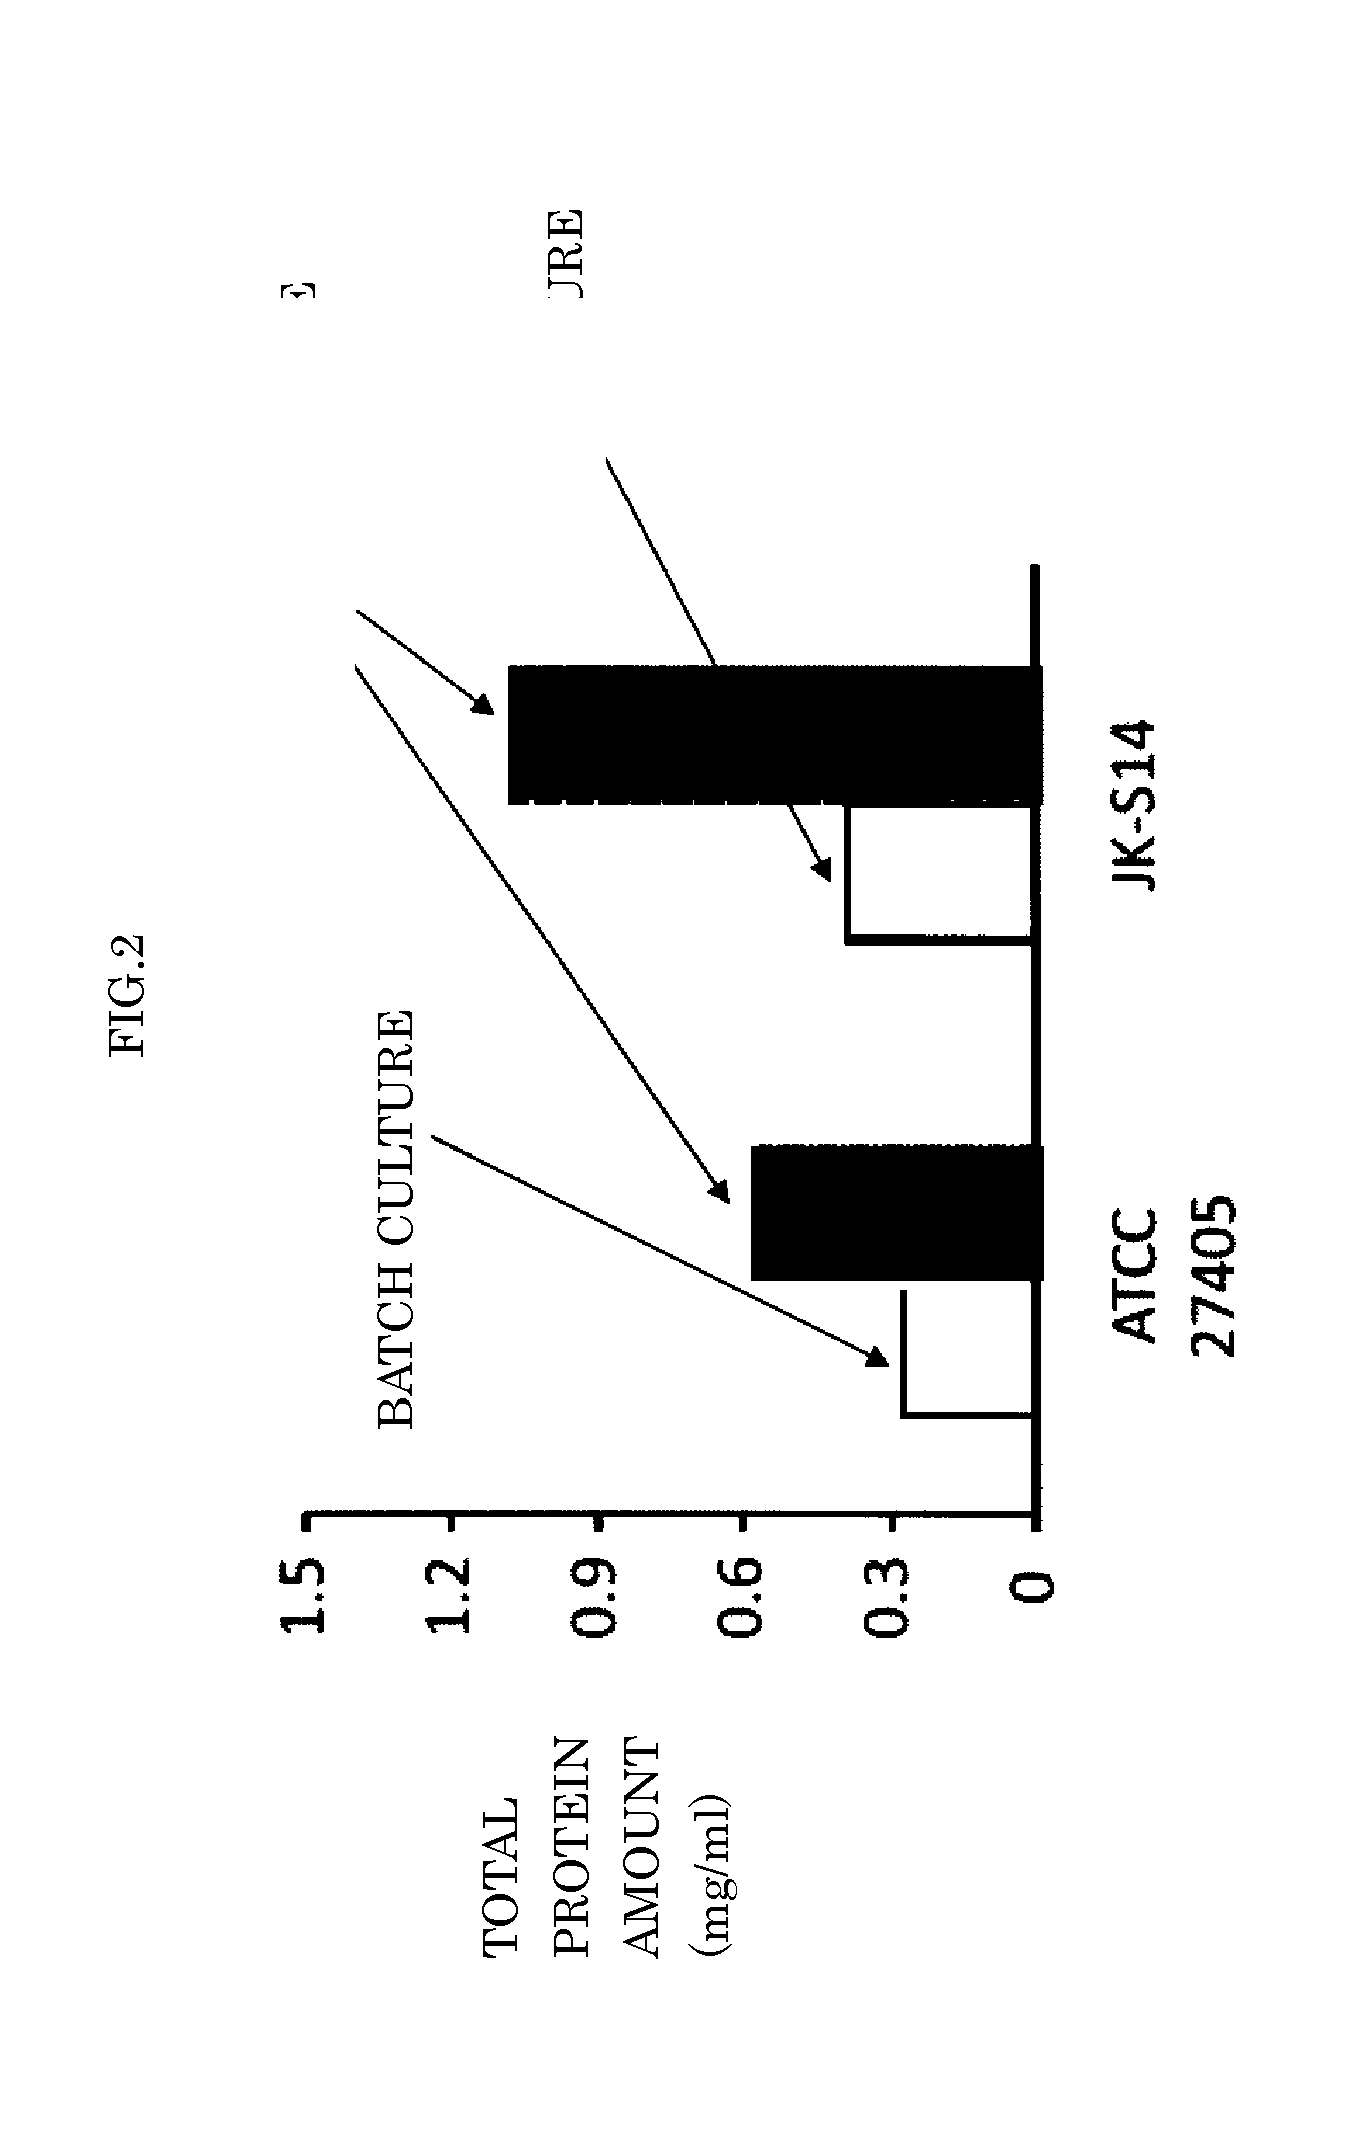 Method for producing cellulolytic enzyme using clostridium microorganism and method for culturing and proliferating clostridium microorganism